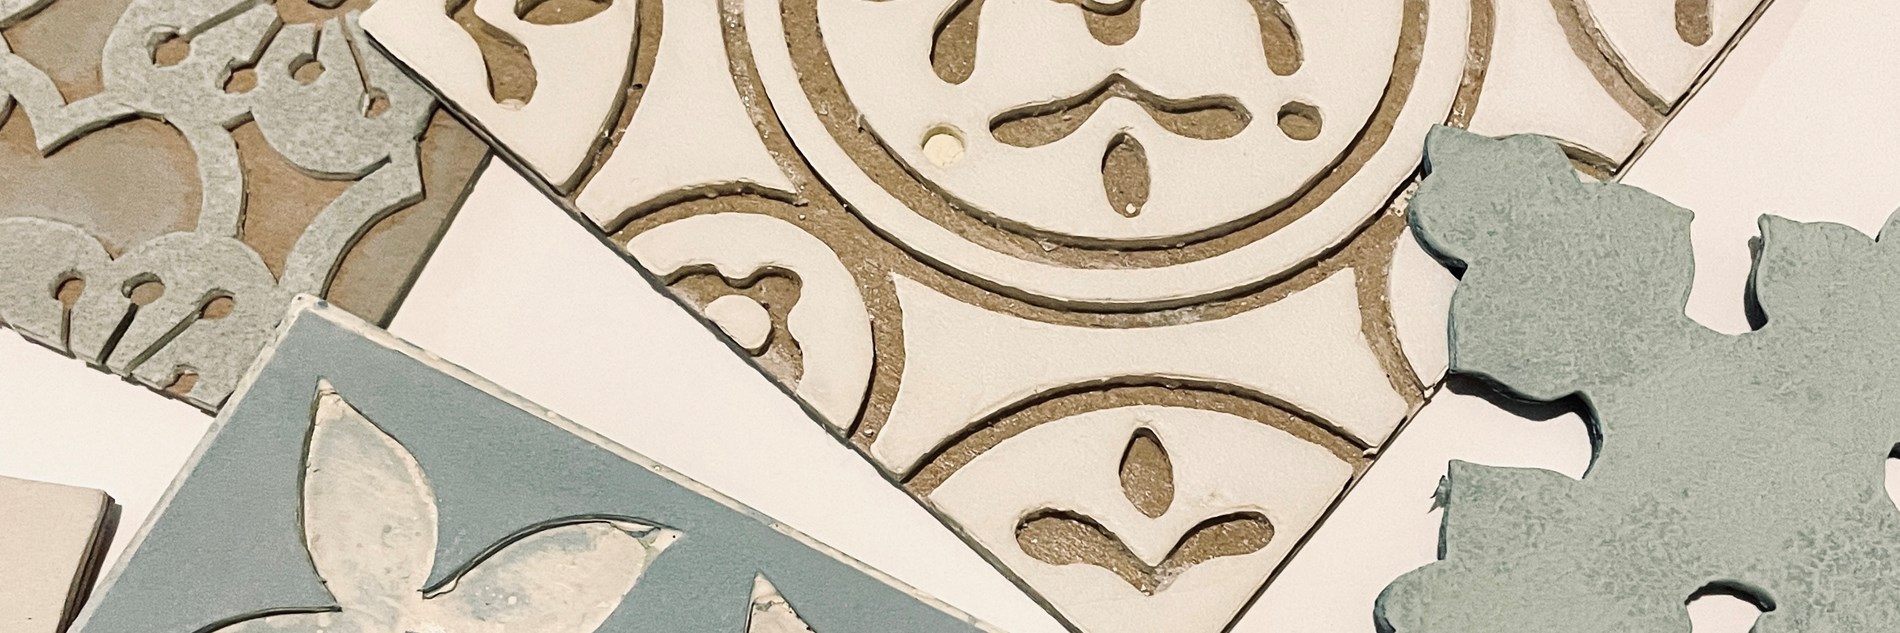 A selection of hand-block printing tiles, they're square shaped with graphic floral patterns.